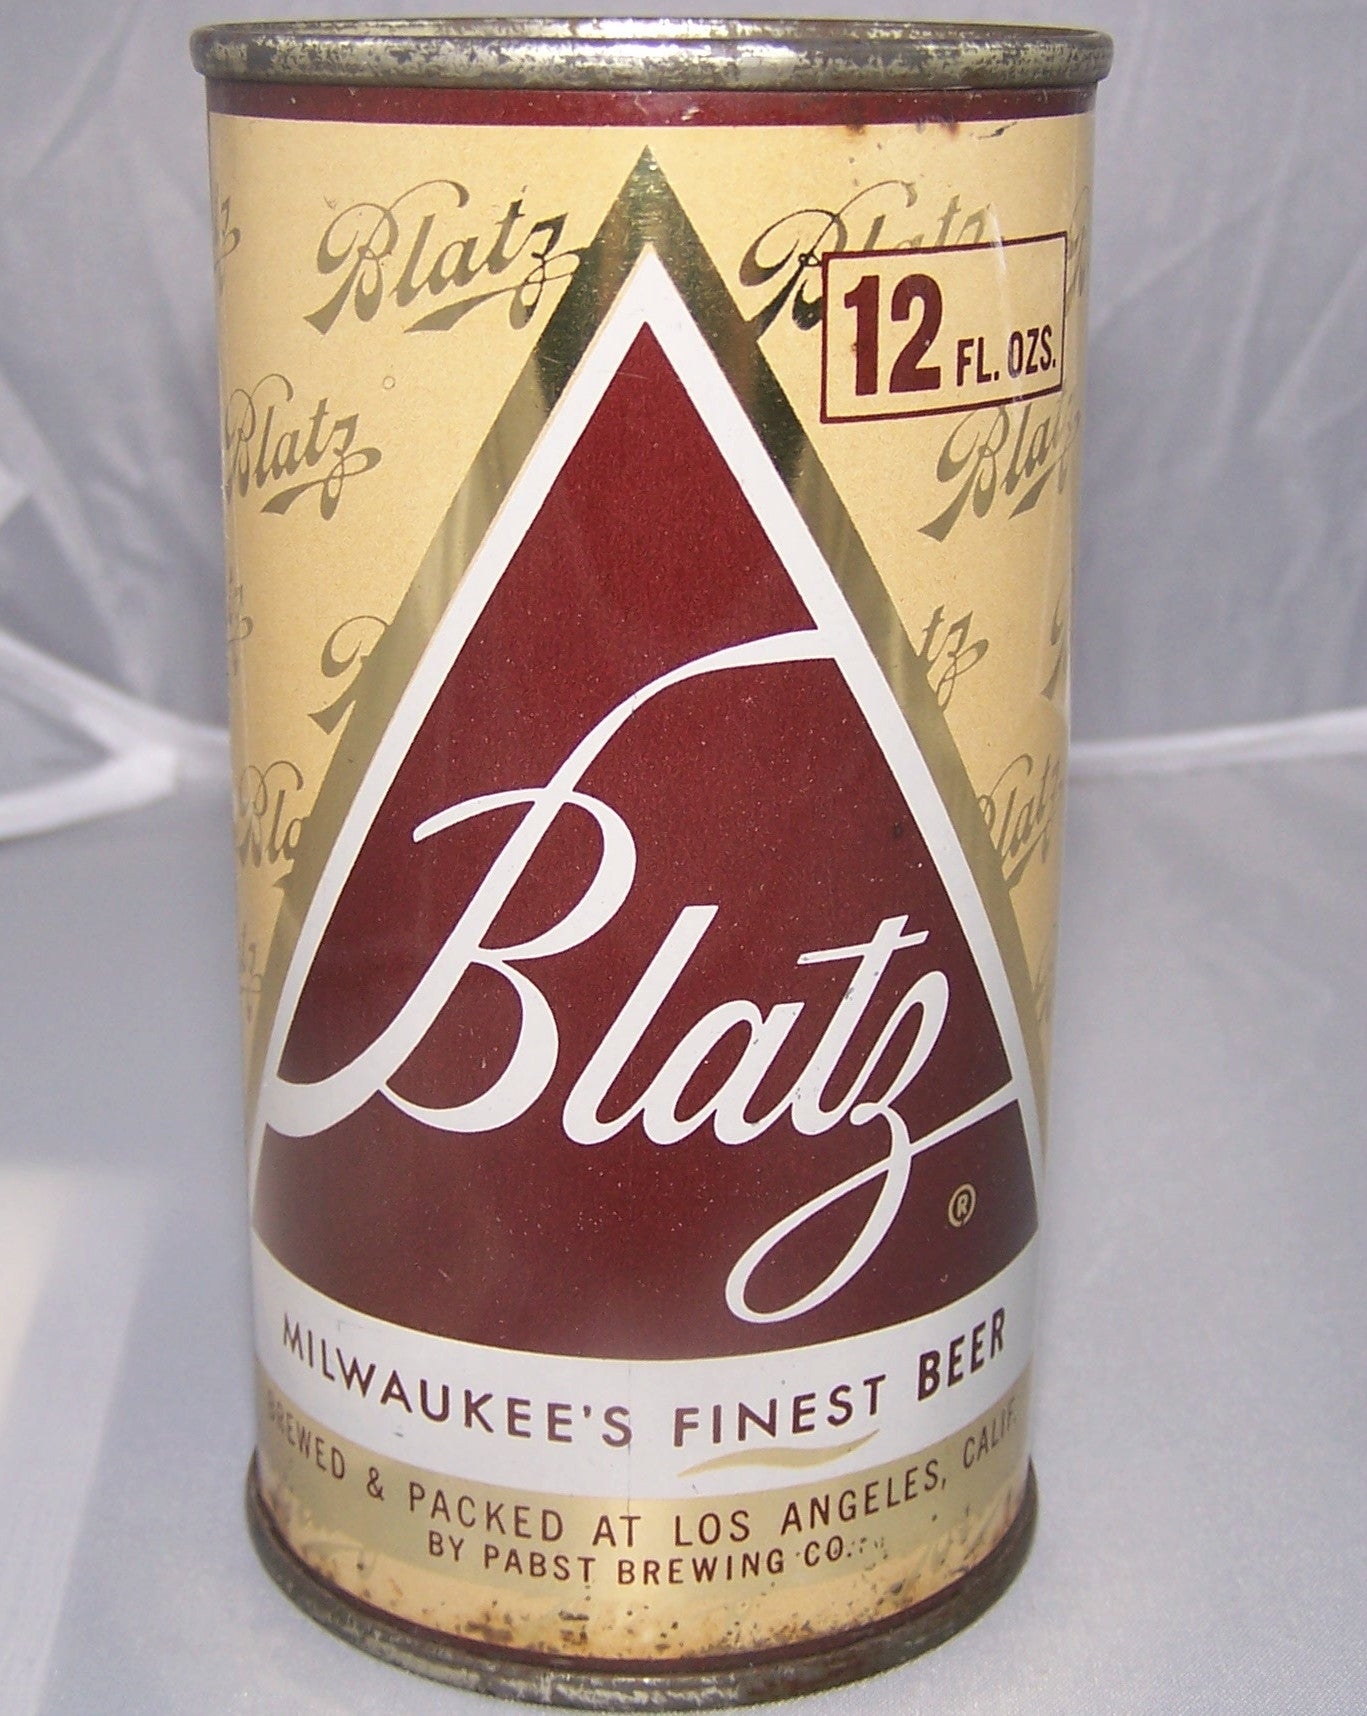 Blatz Beer L.A USBC 38-40, Grade 1/1+ Sold on 9/1/15 – Beer Cans Plus